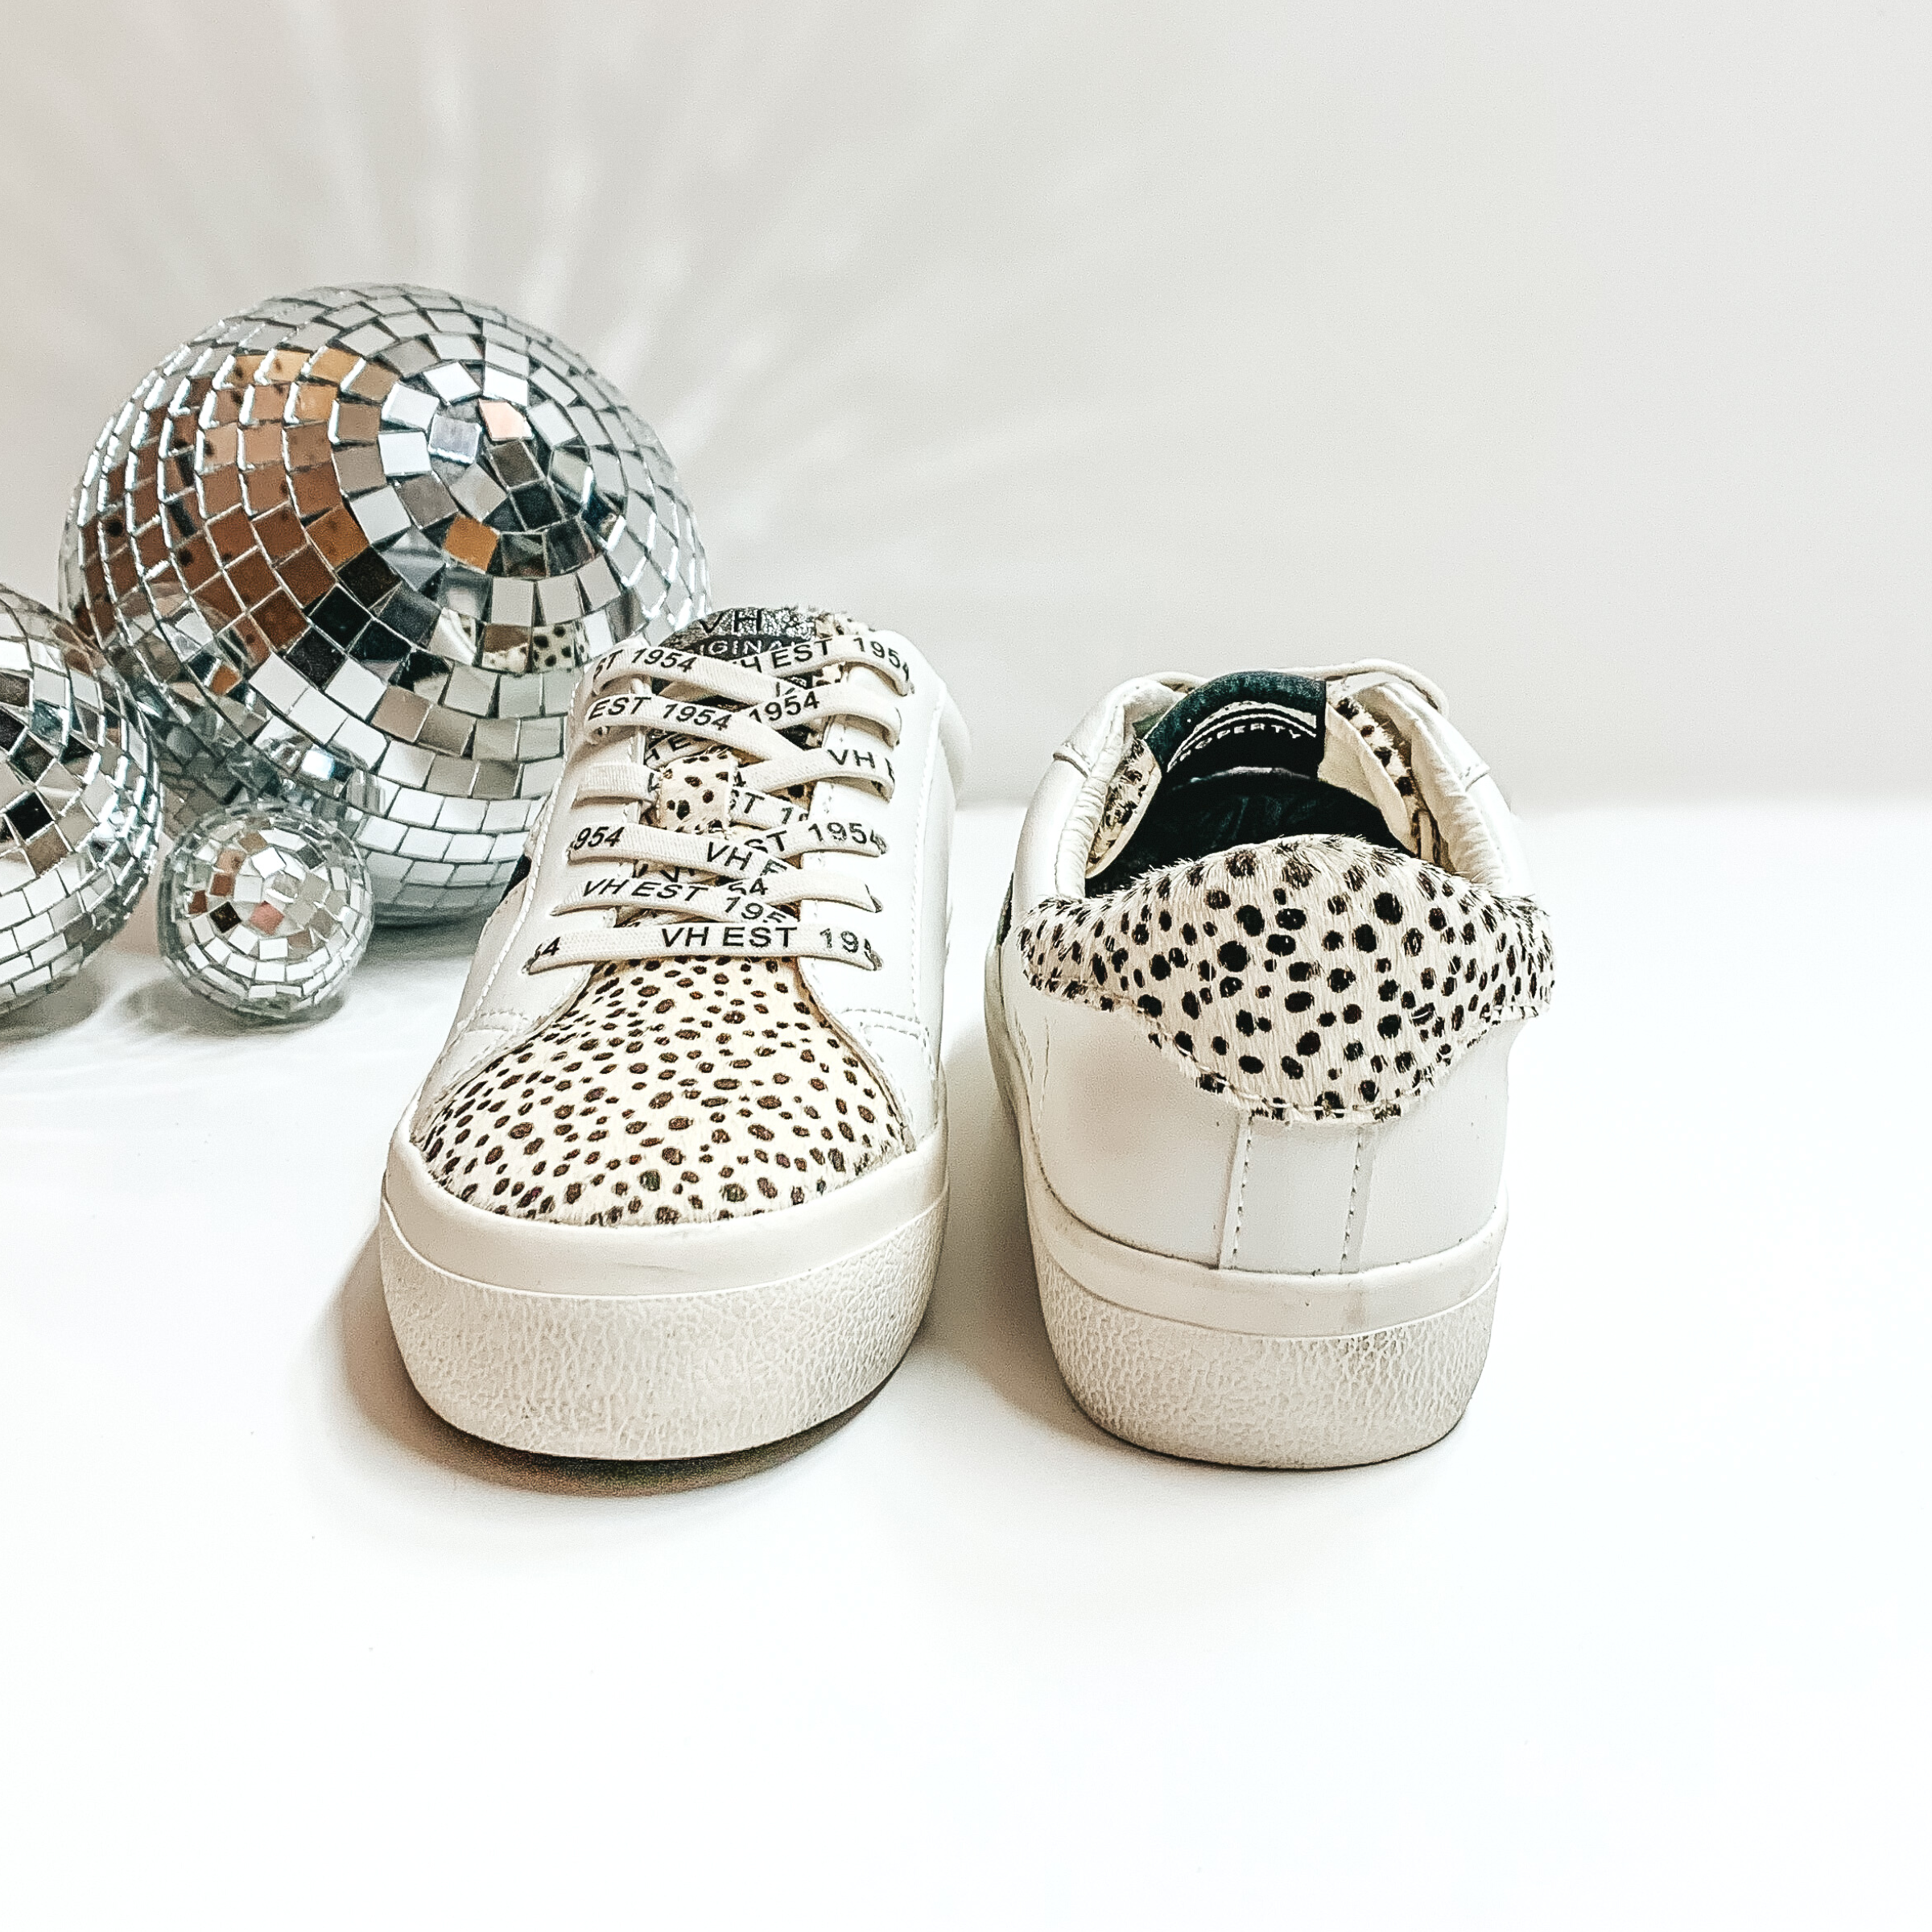 Vintage Havana | Forever Sneakers in Wild Cheetah Print - Giddy Up Glamour Boutique